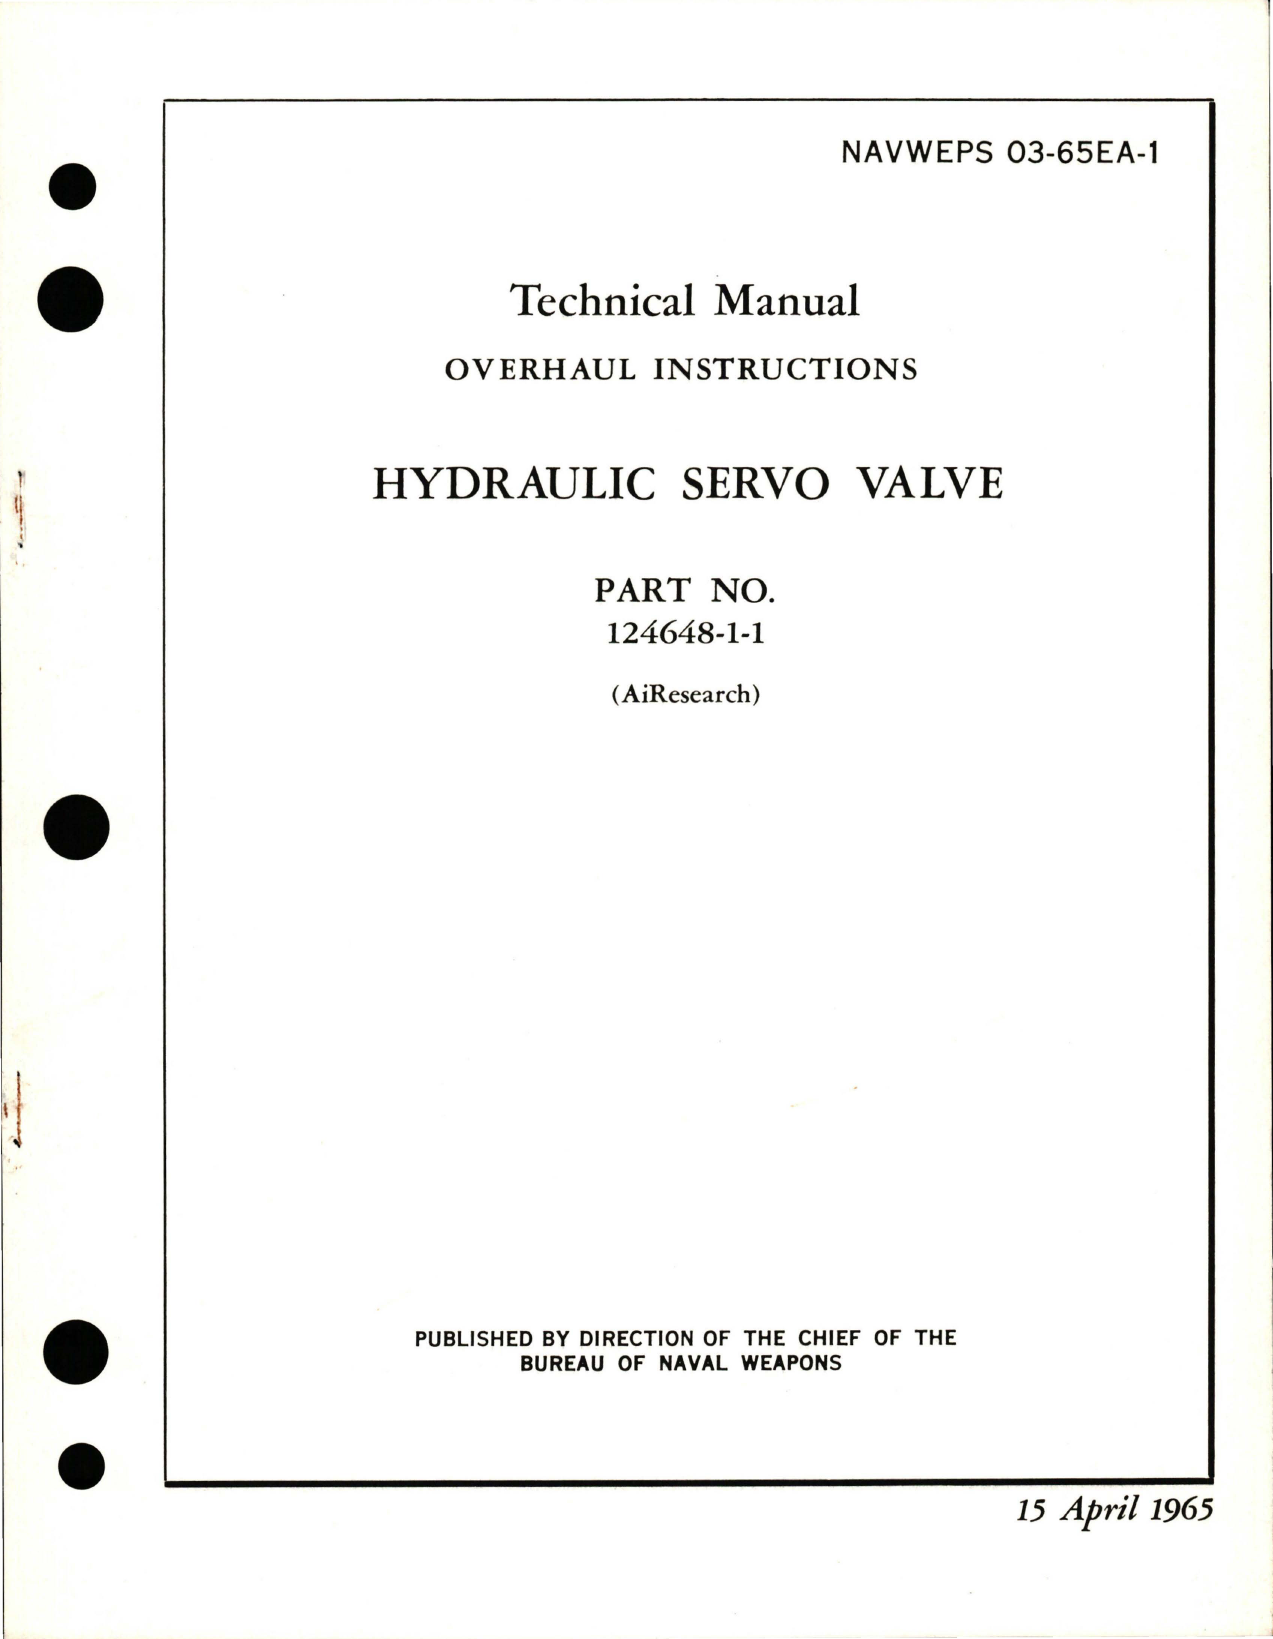 Sample page 1 from AirCorps Library document: Overhaul Instructions for Hydraulic Servo Valve - Part 124648-1-1